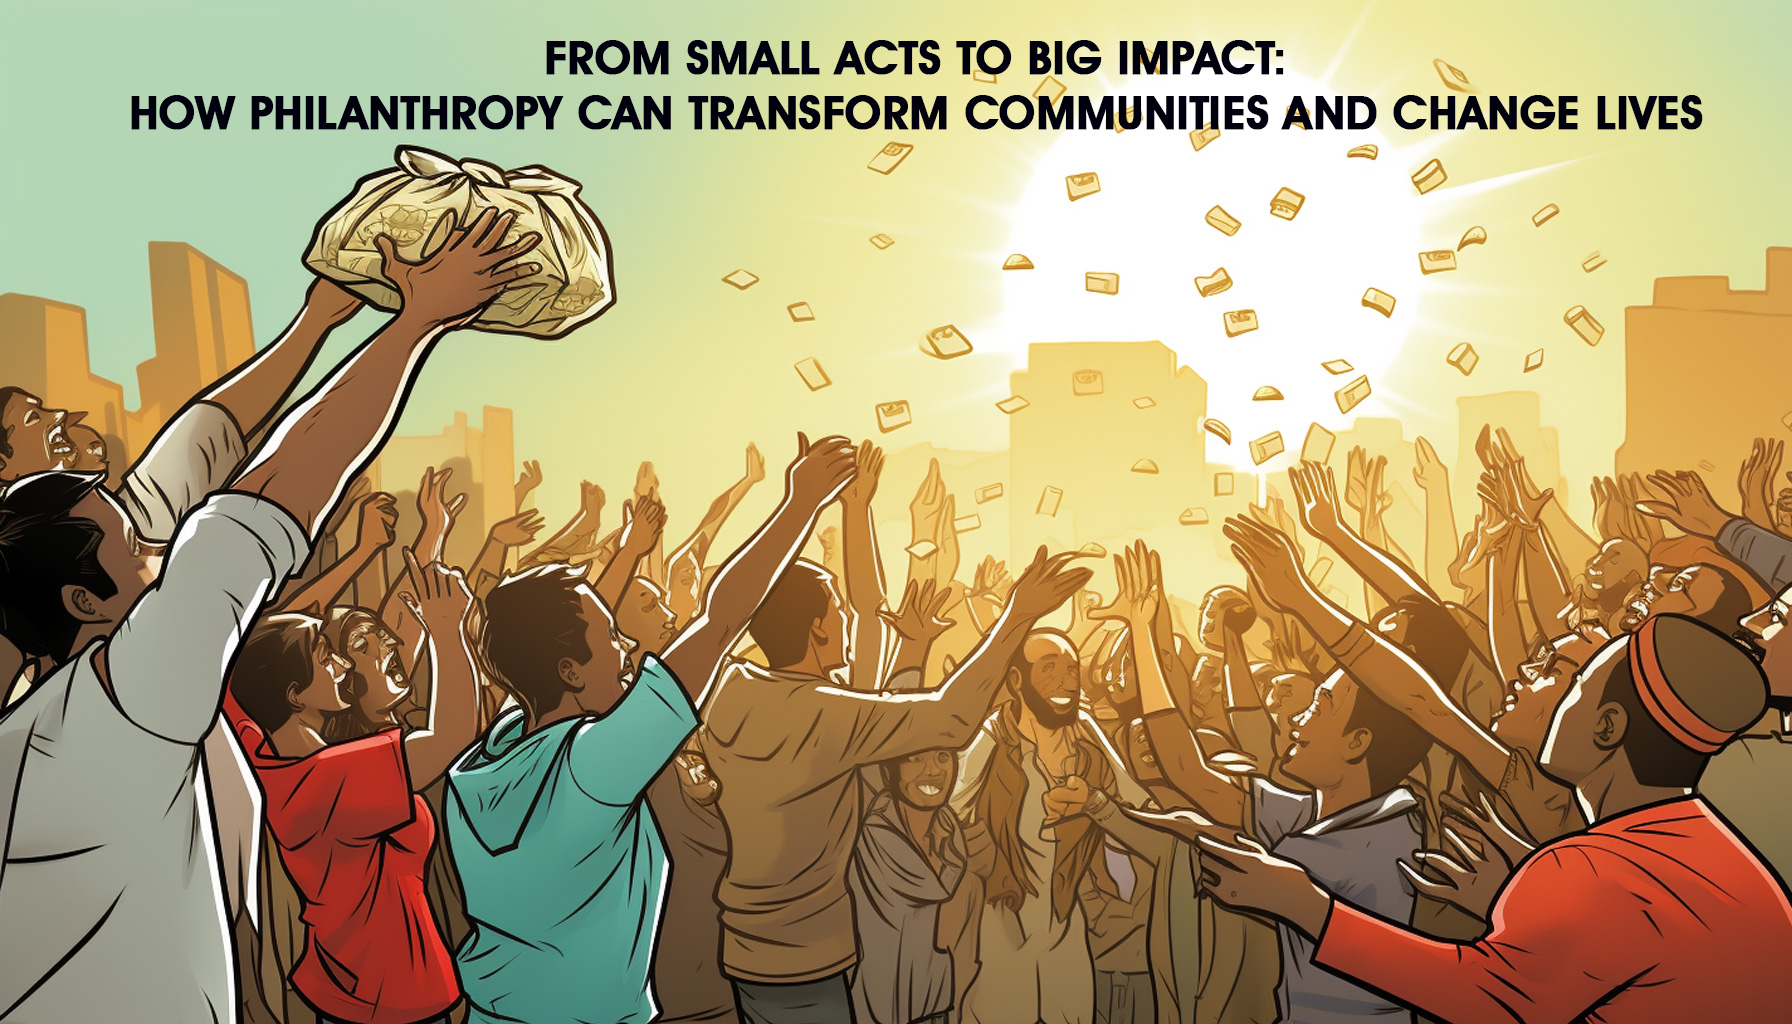 From Small Acts to Big Impact: How Philanthropy Can Transform Communities and Change Lives